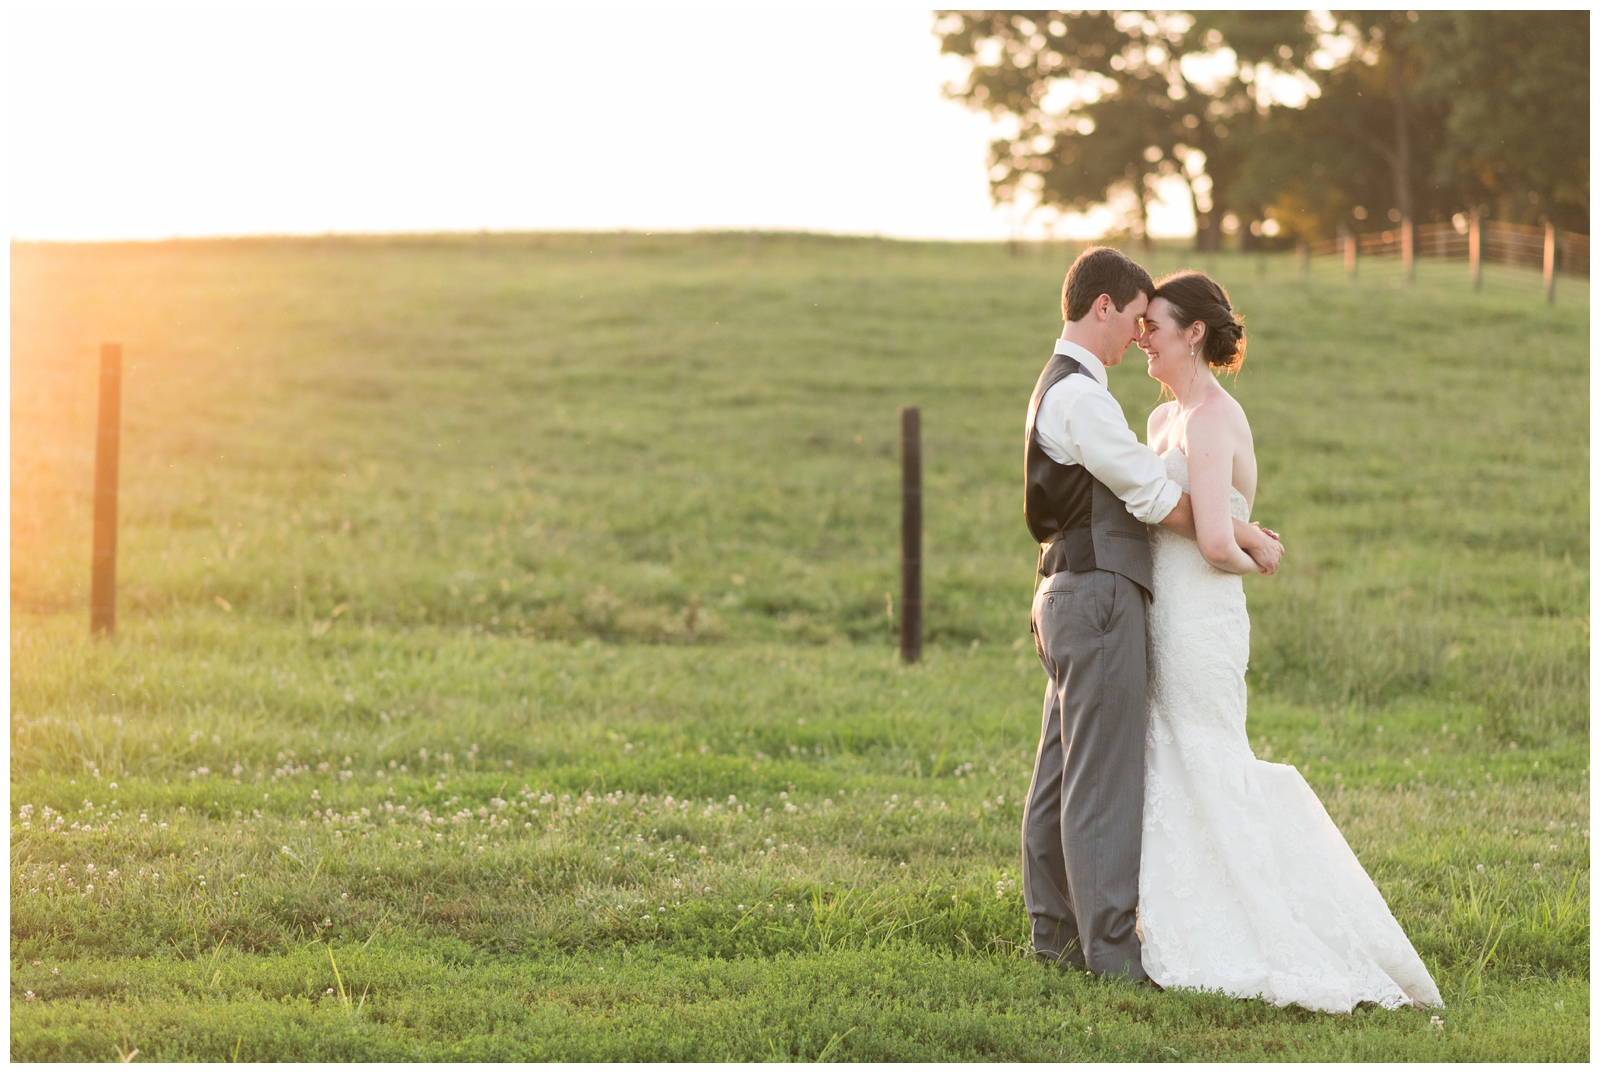 sophisticated bride and groom on their elegant wedding day in a field at sunset looking at eachother hugging